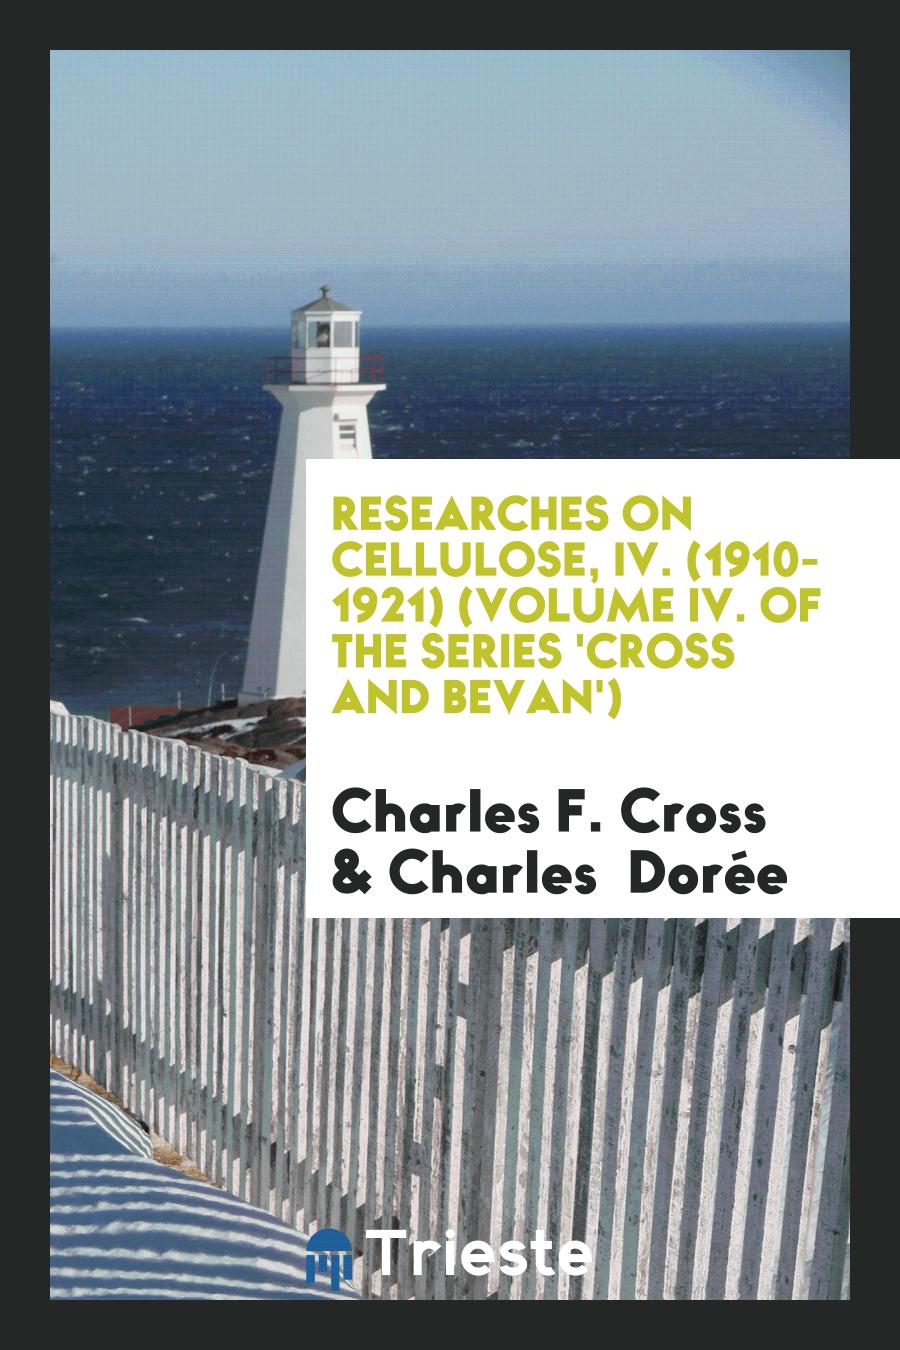 Researches on Cellulose, IV. (1910-1921) (Volume IV. of the Series 'Cross and Bevan')